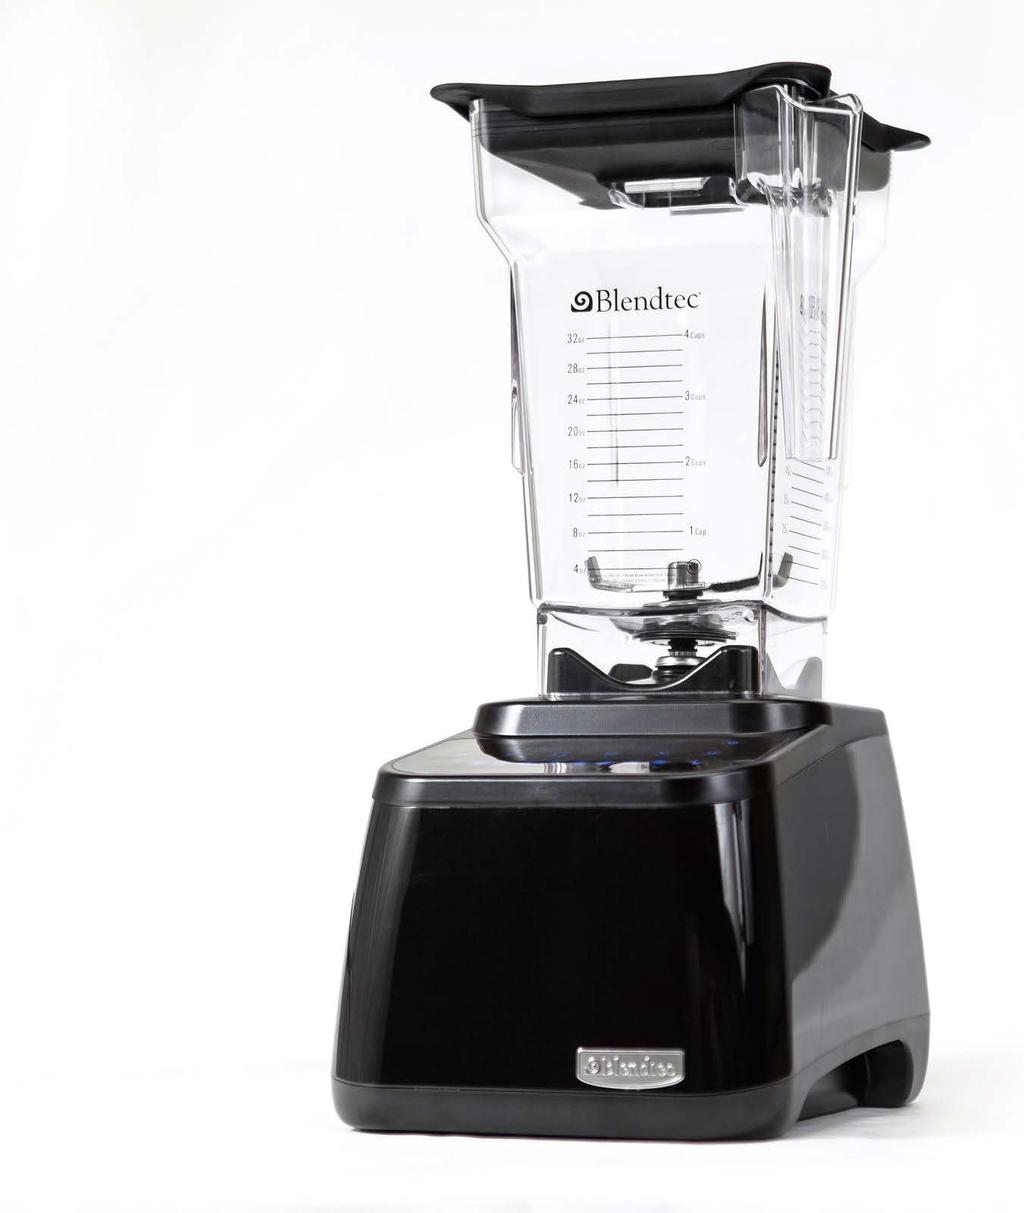 HOW TO CHOOSE THE BEST BLENDER If you could only buy a blender or a juicer, I would recommend getting a blender simply because you can get more use out of it.